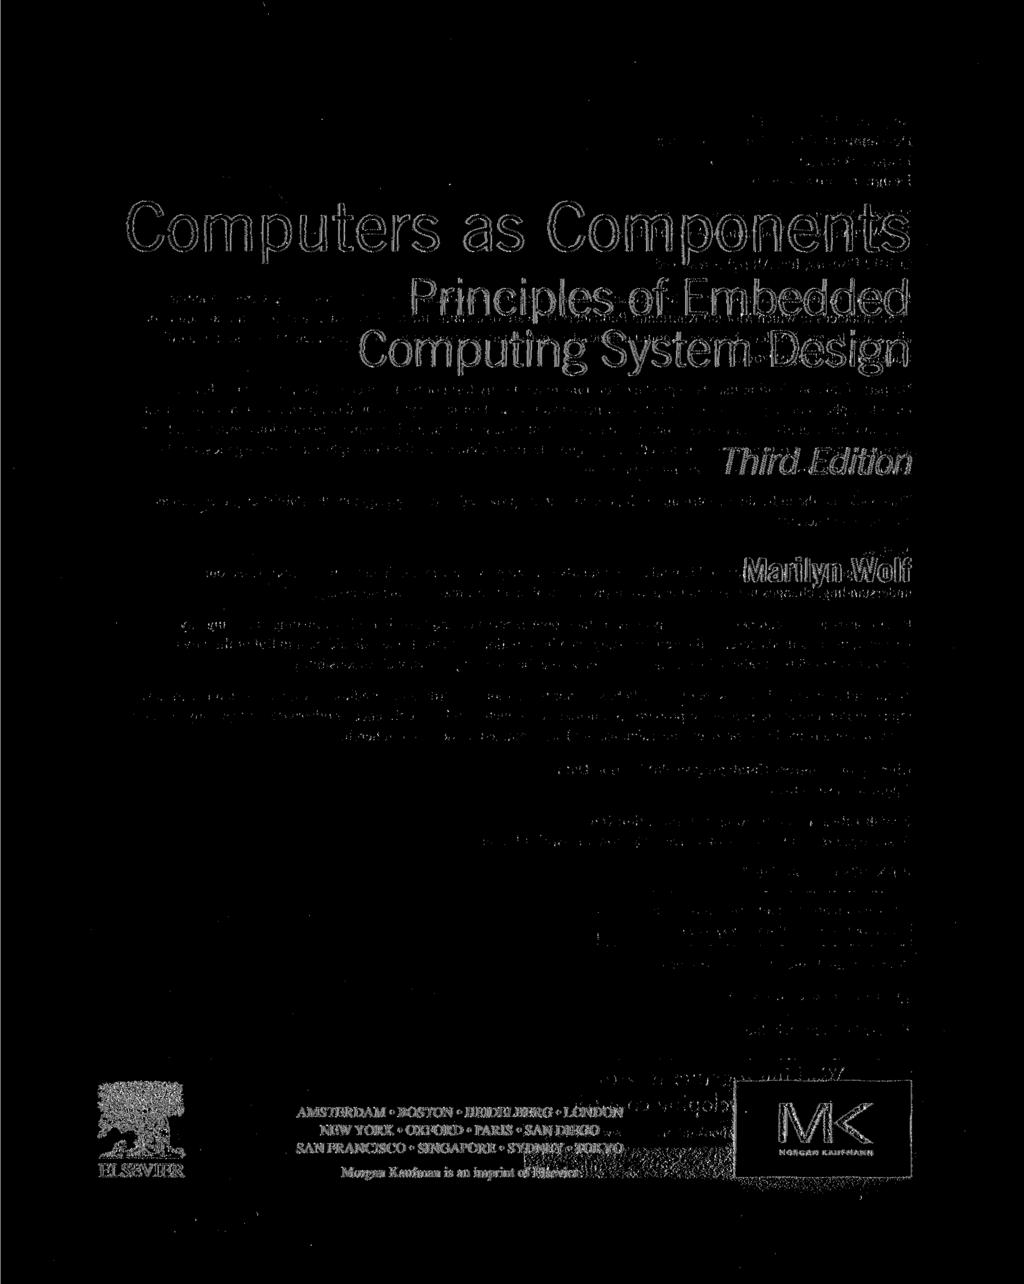 Computers as Components Principles of Embedded Computing System Design Third Edition Marilyn Wolf ELSEVIER AMSTERDAM BOSTON